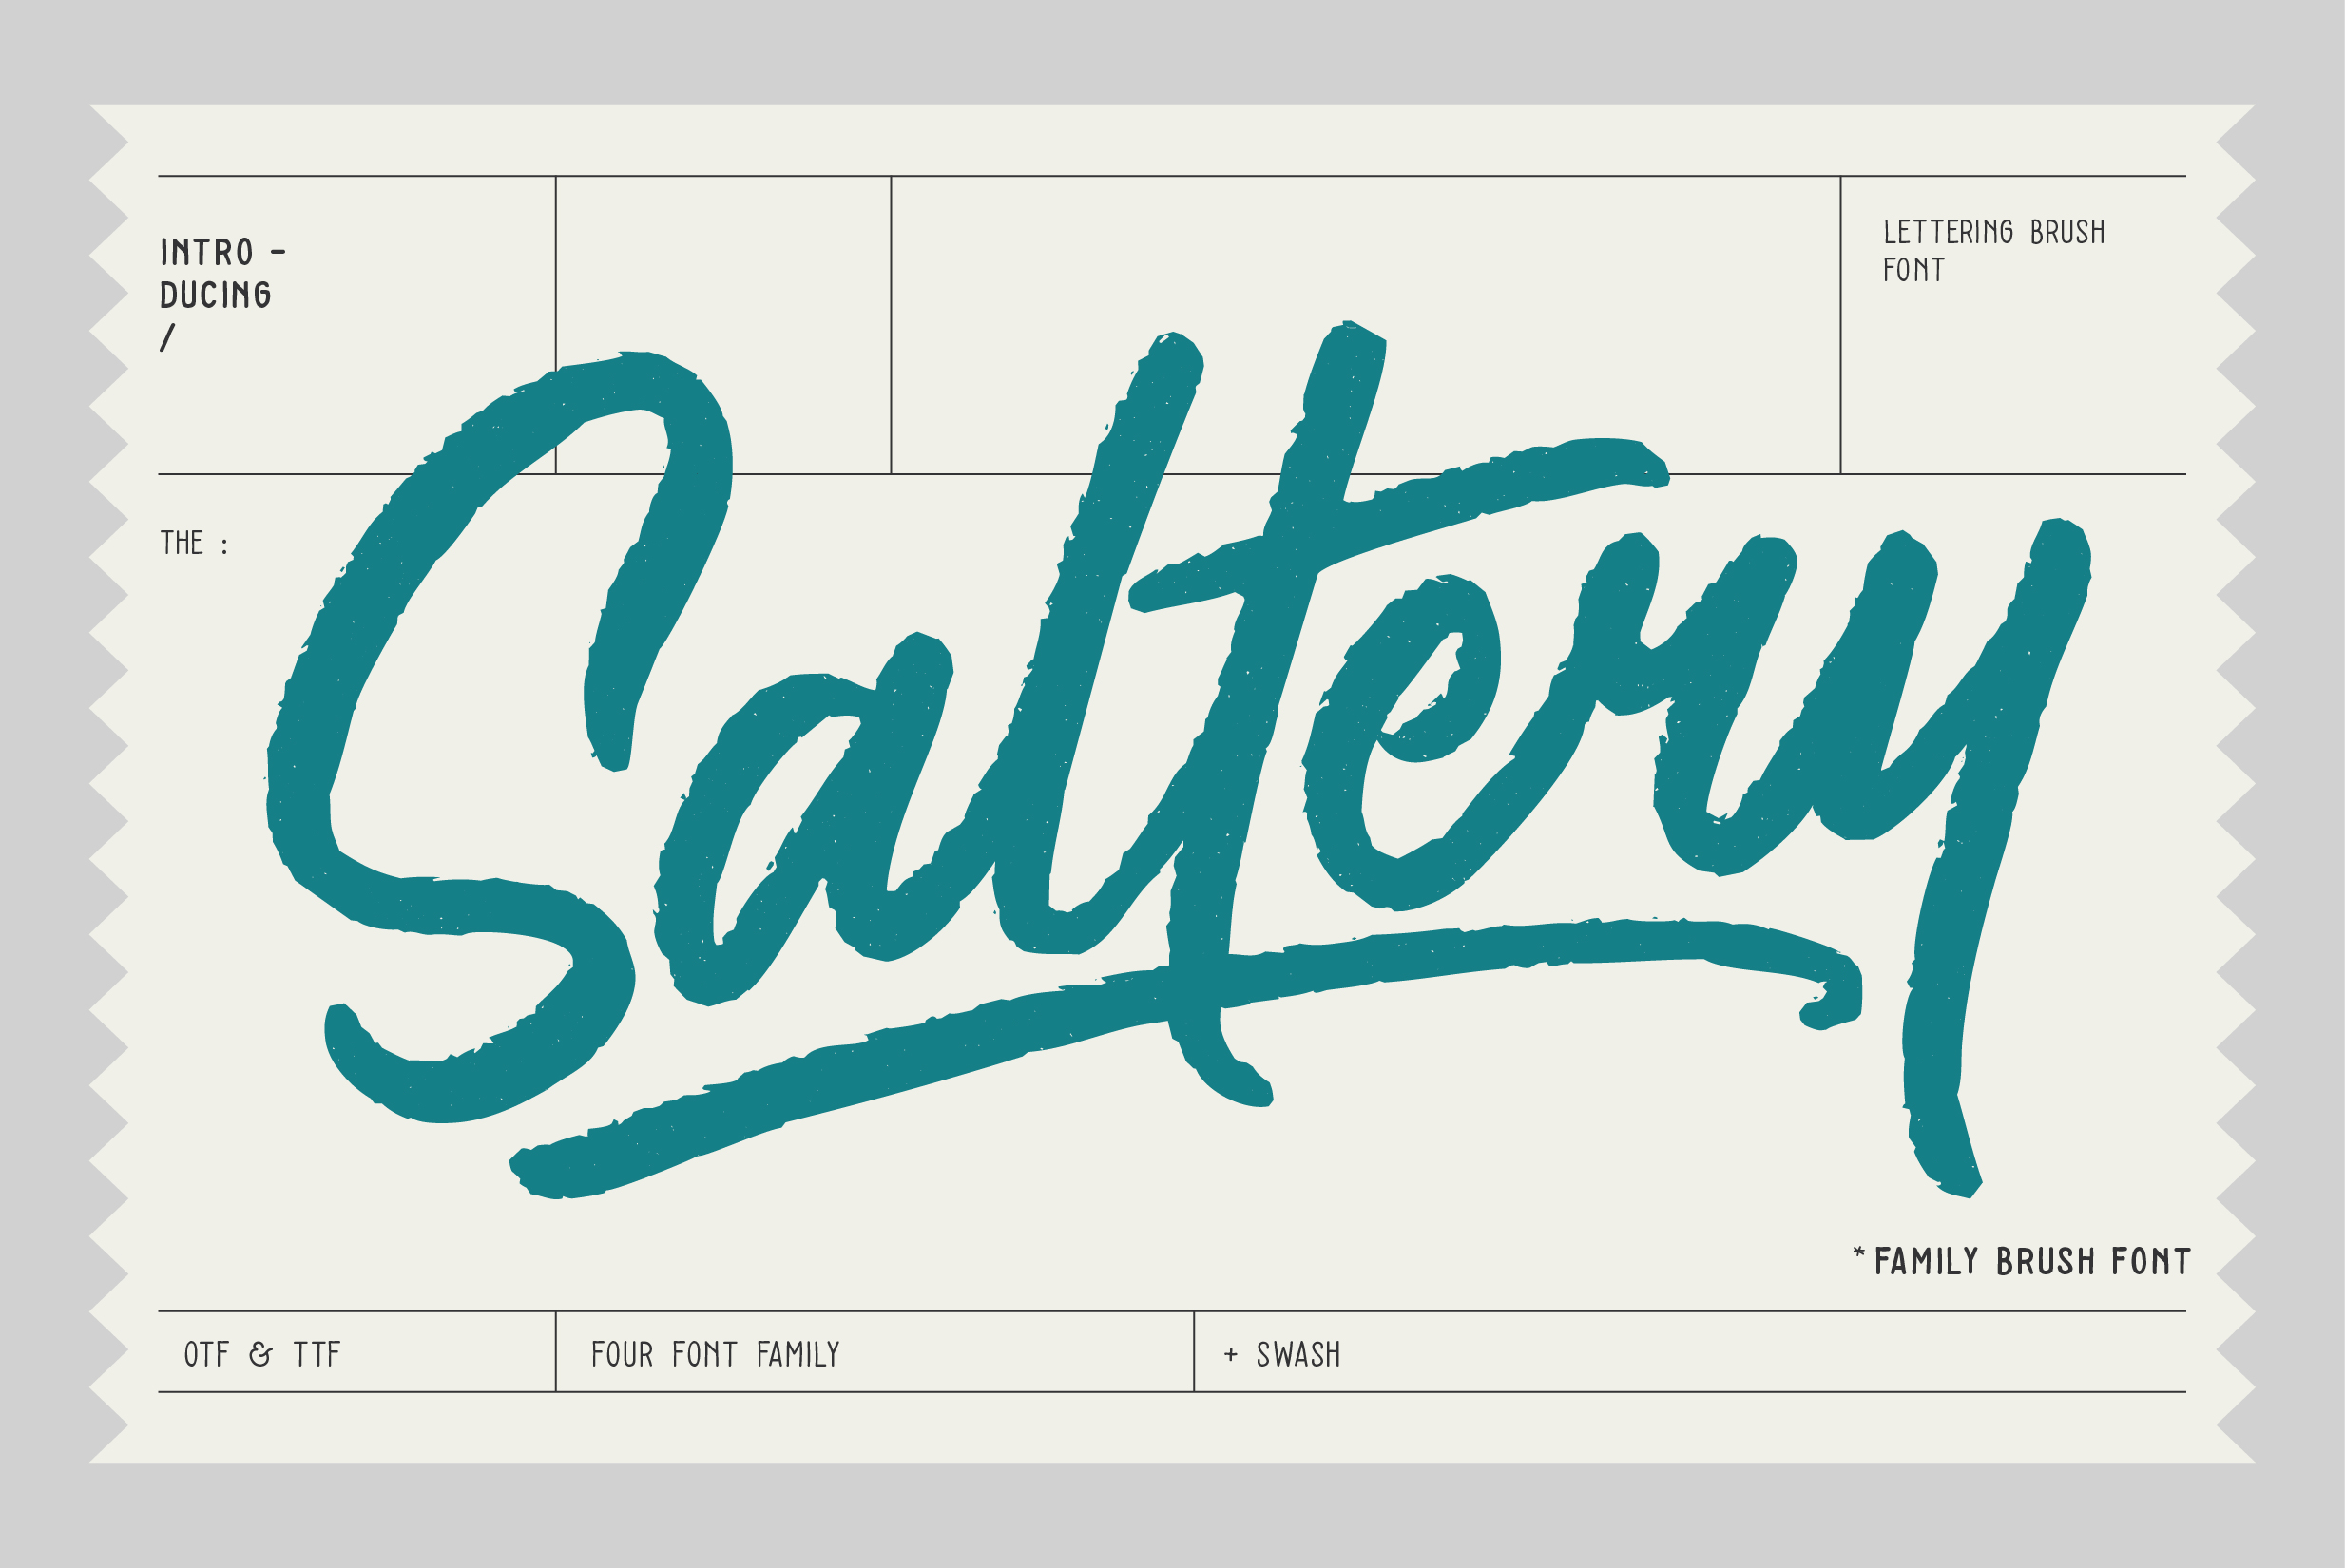 Saltery Font Poster 1